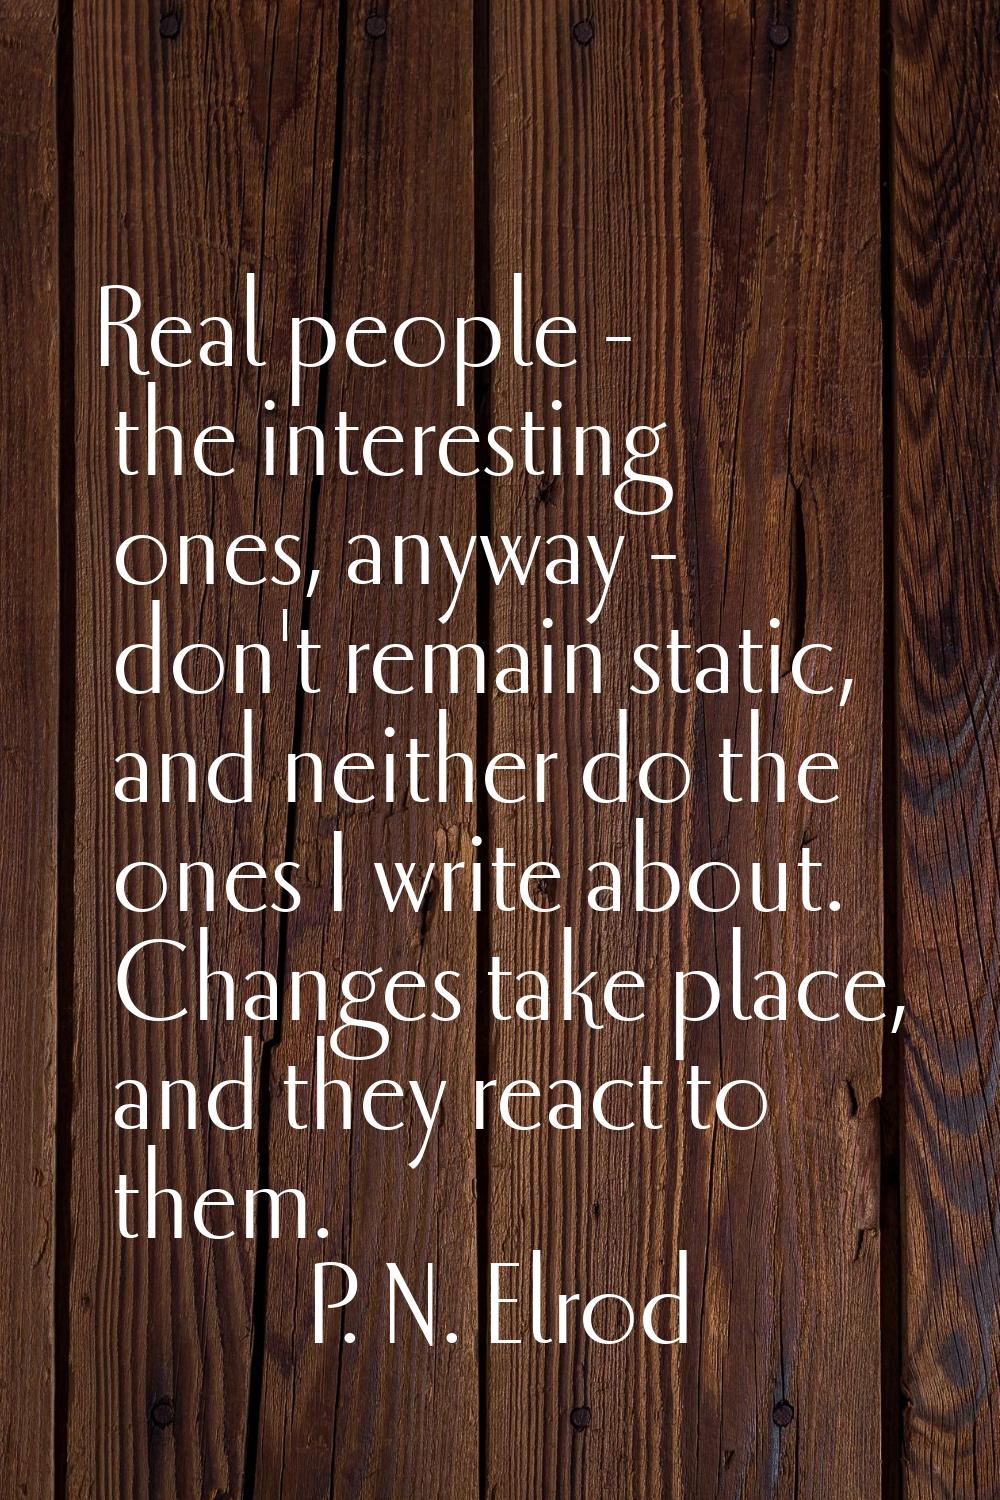 Real people - the interesting ones, anyway - don't remain static, and neither do the ones I write a